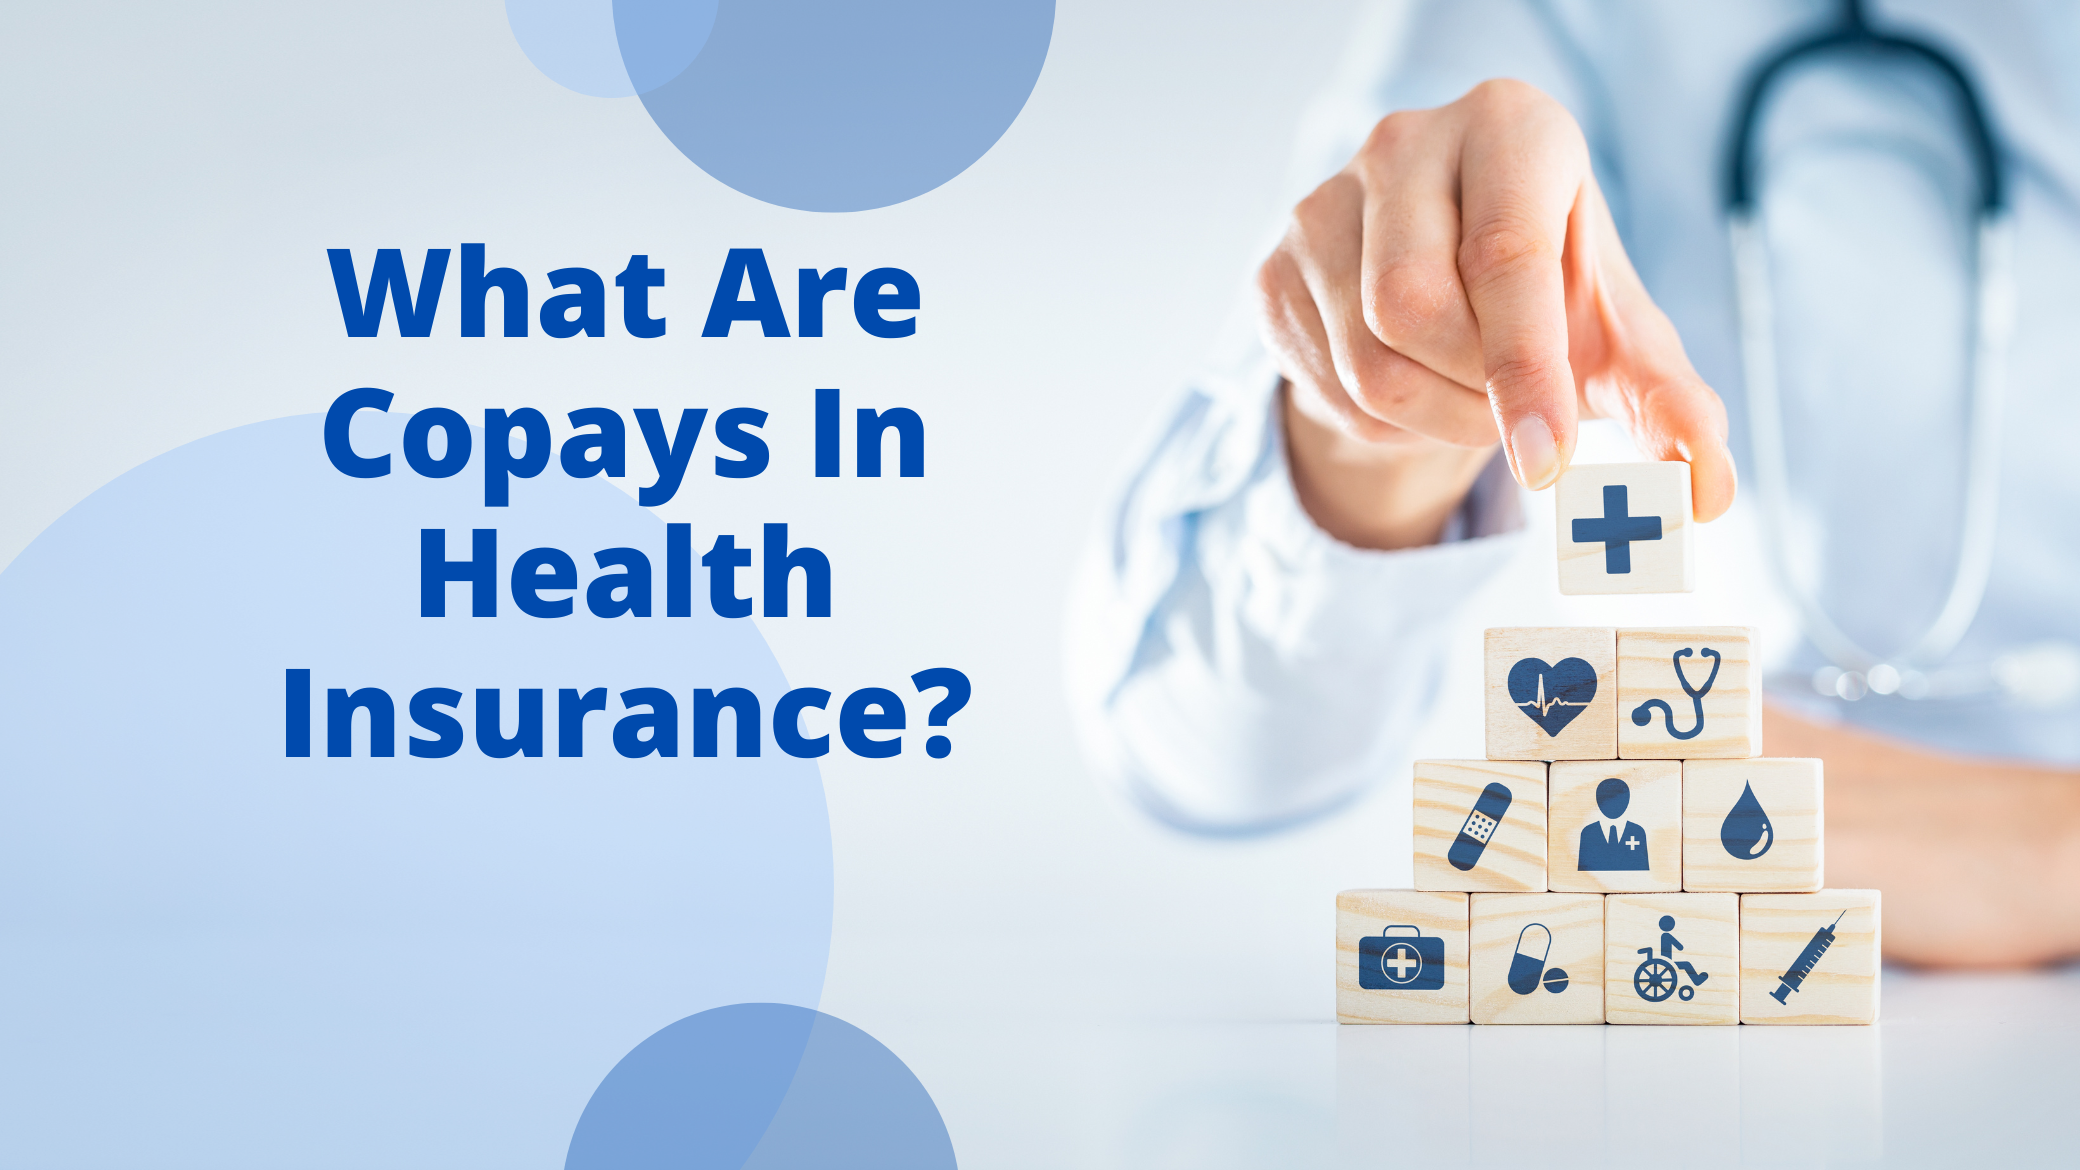 What Are Copays In Health Insurance